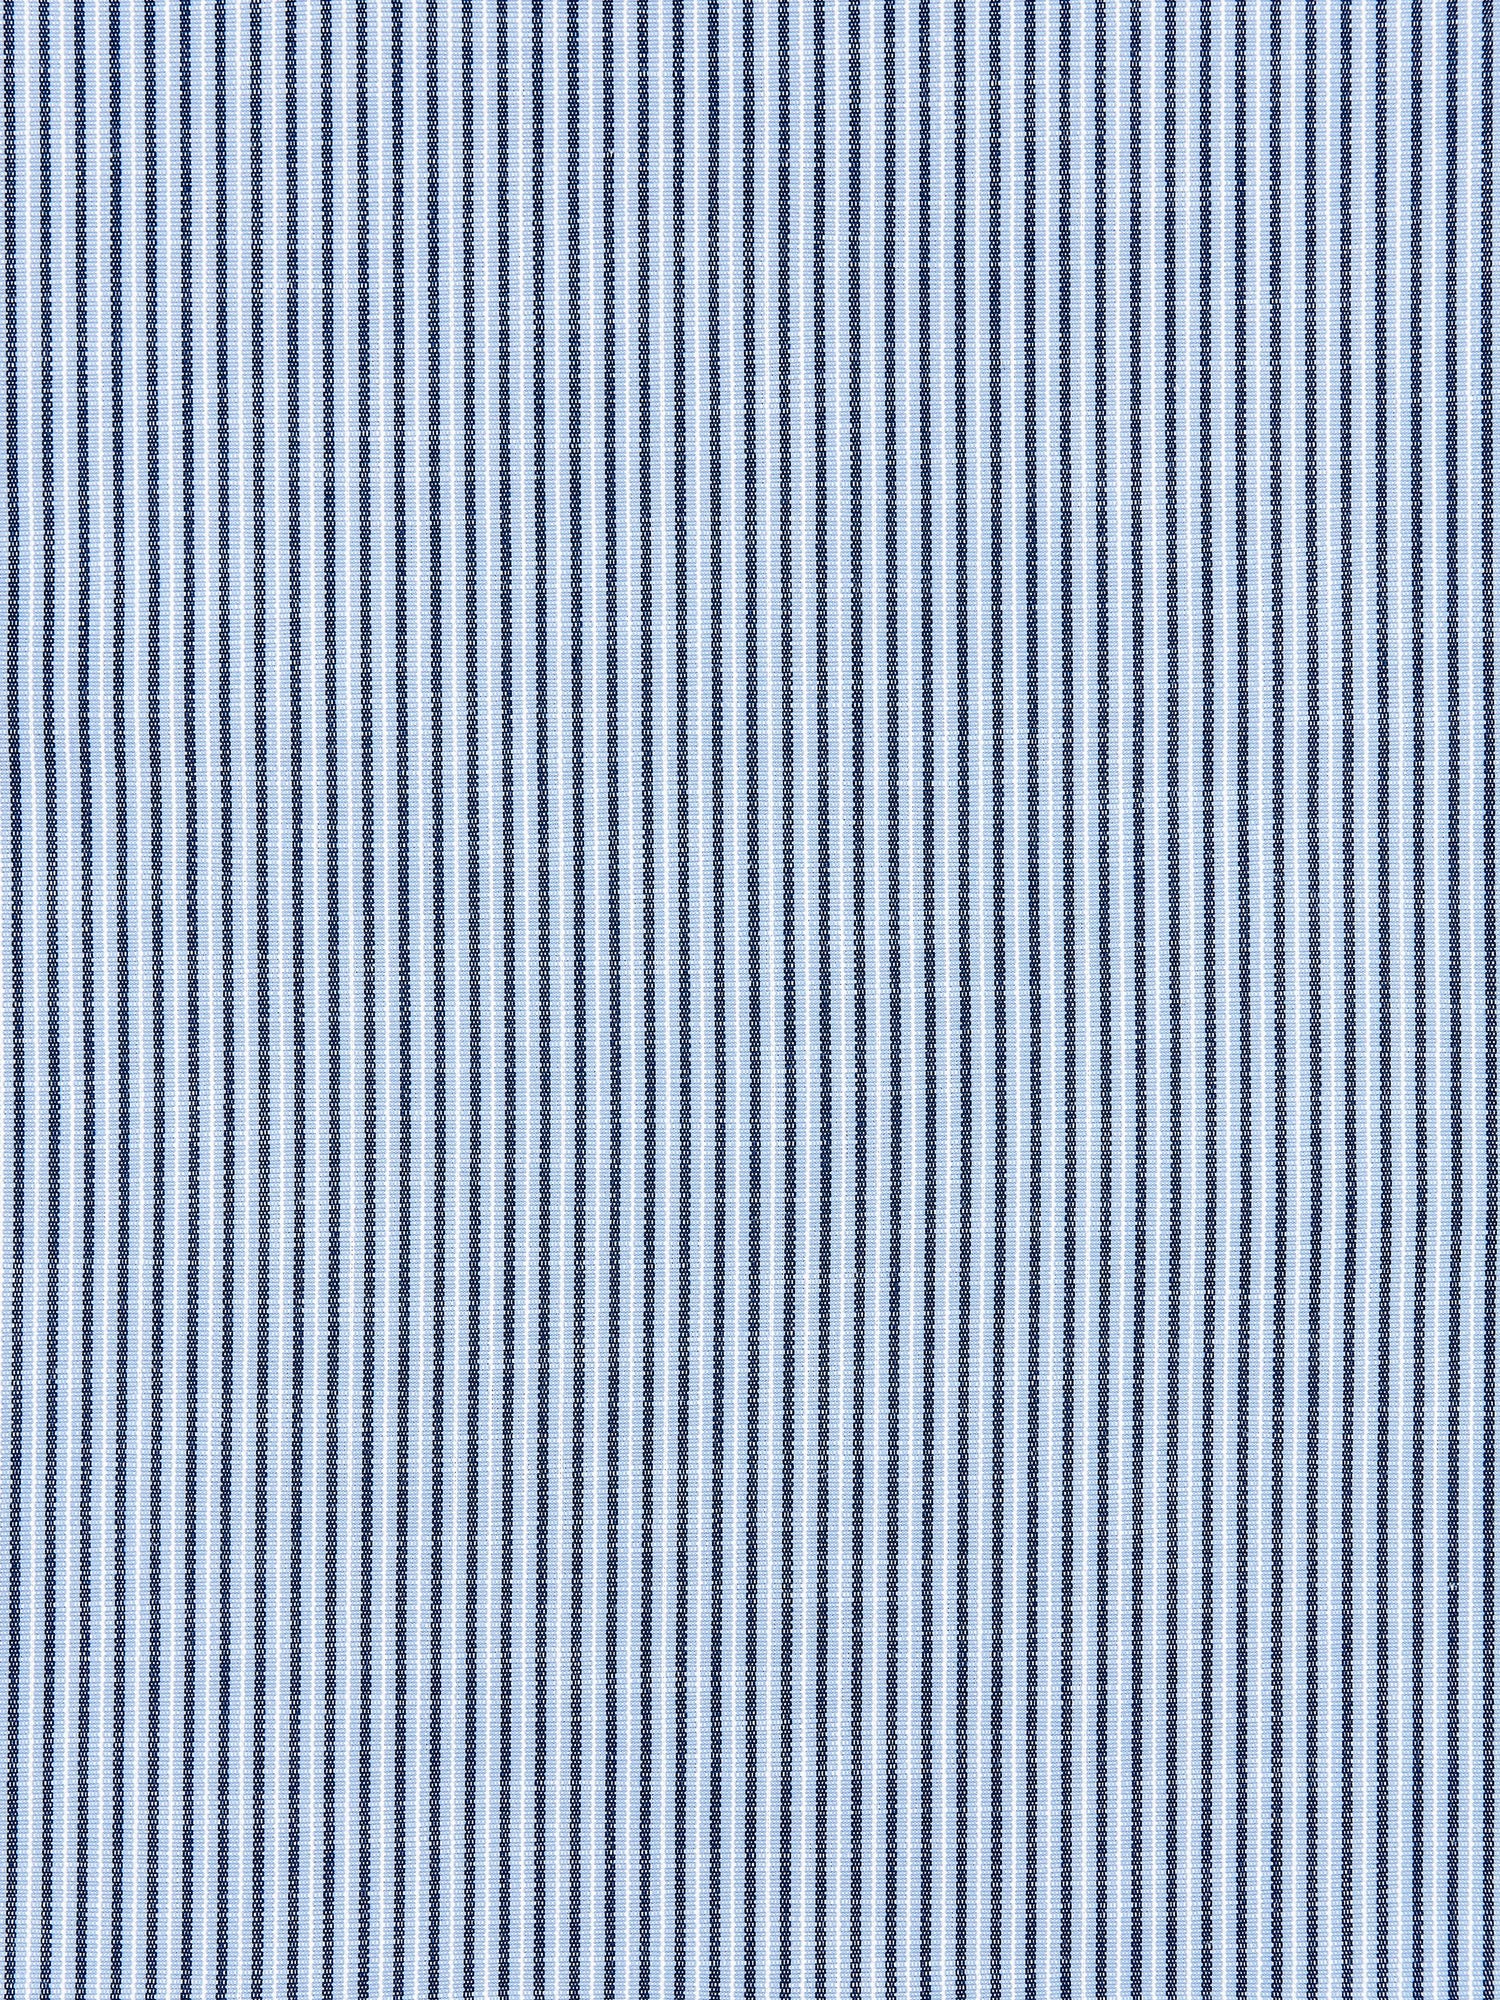 Tisbury Stripe fabric in cornflower color - pattern number SC 000327109 - by Scalamandre in the Scalamandre Fabrics Book 1 collection